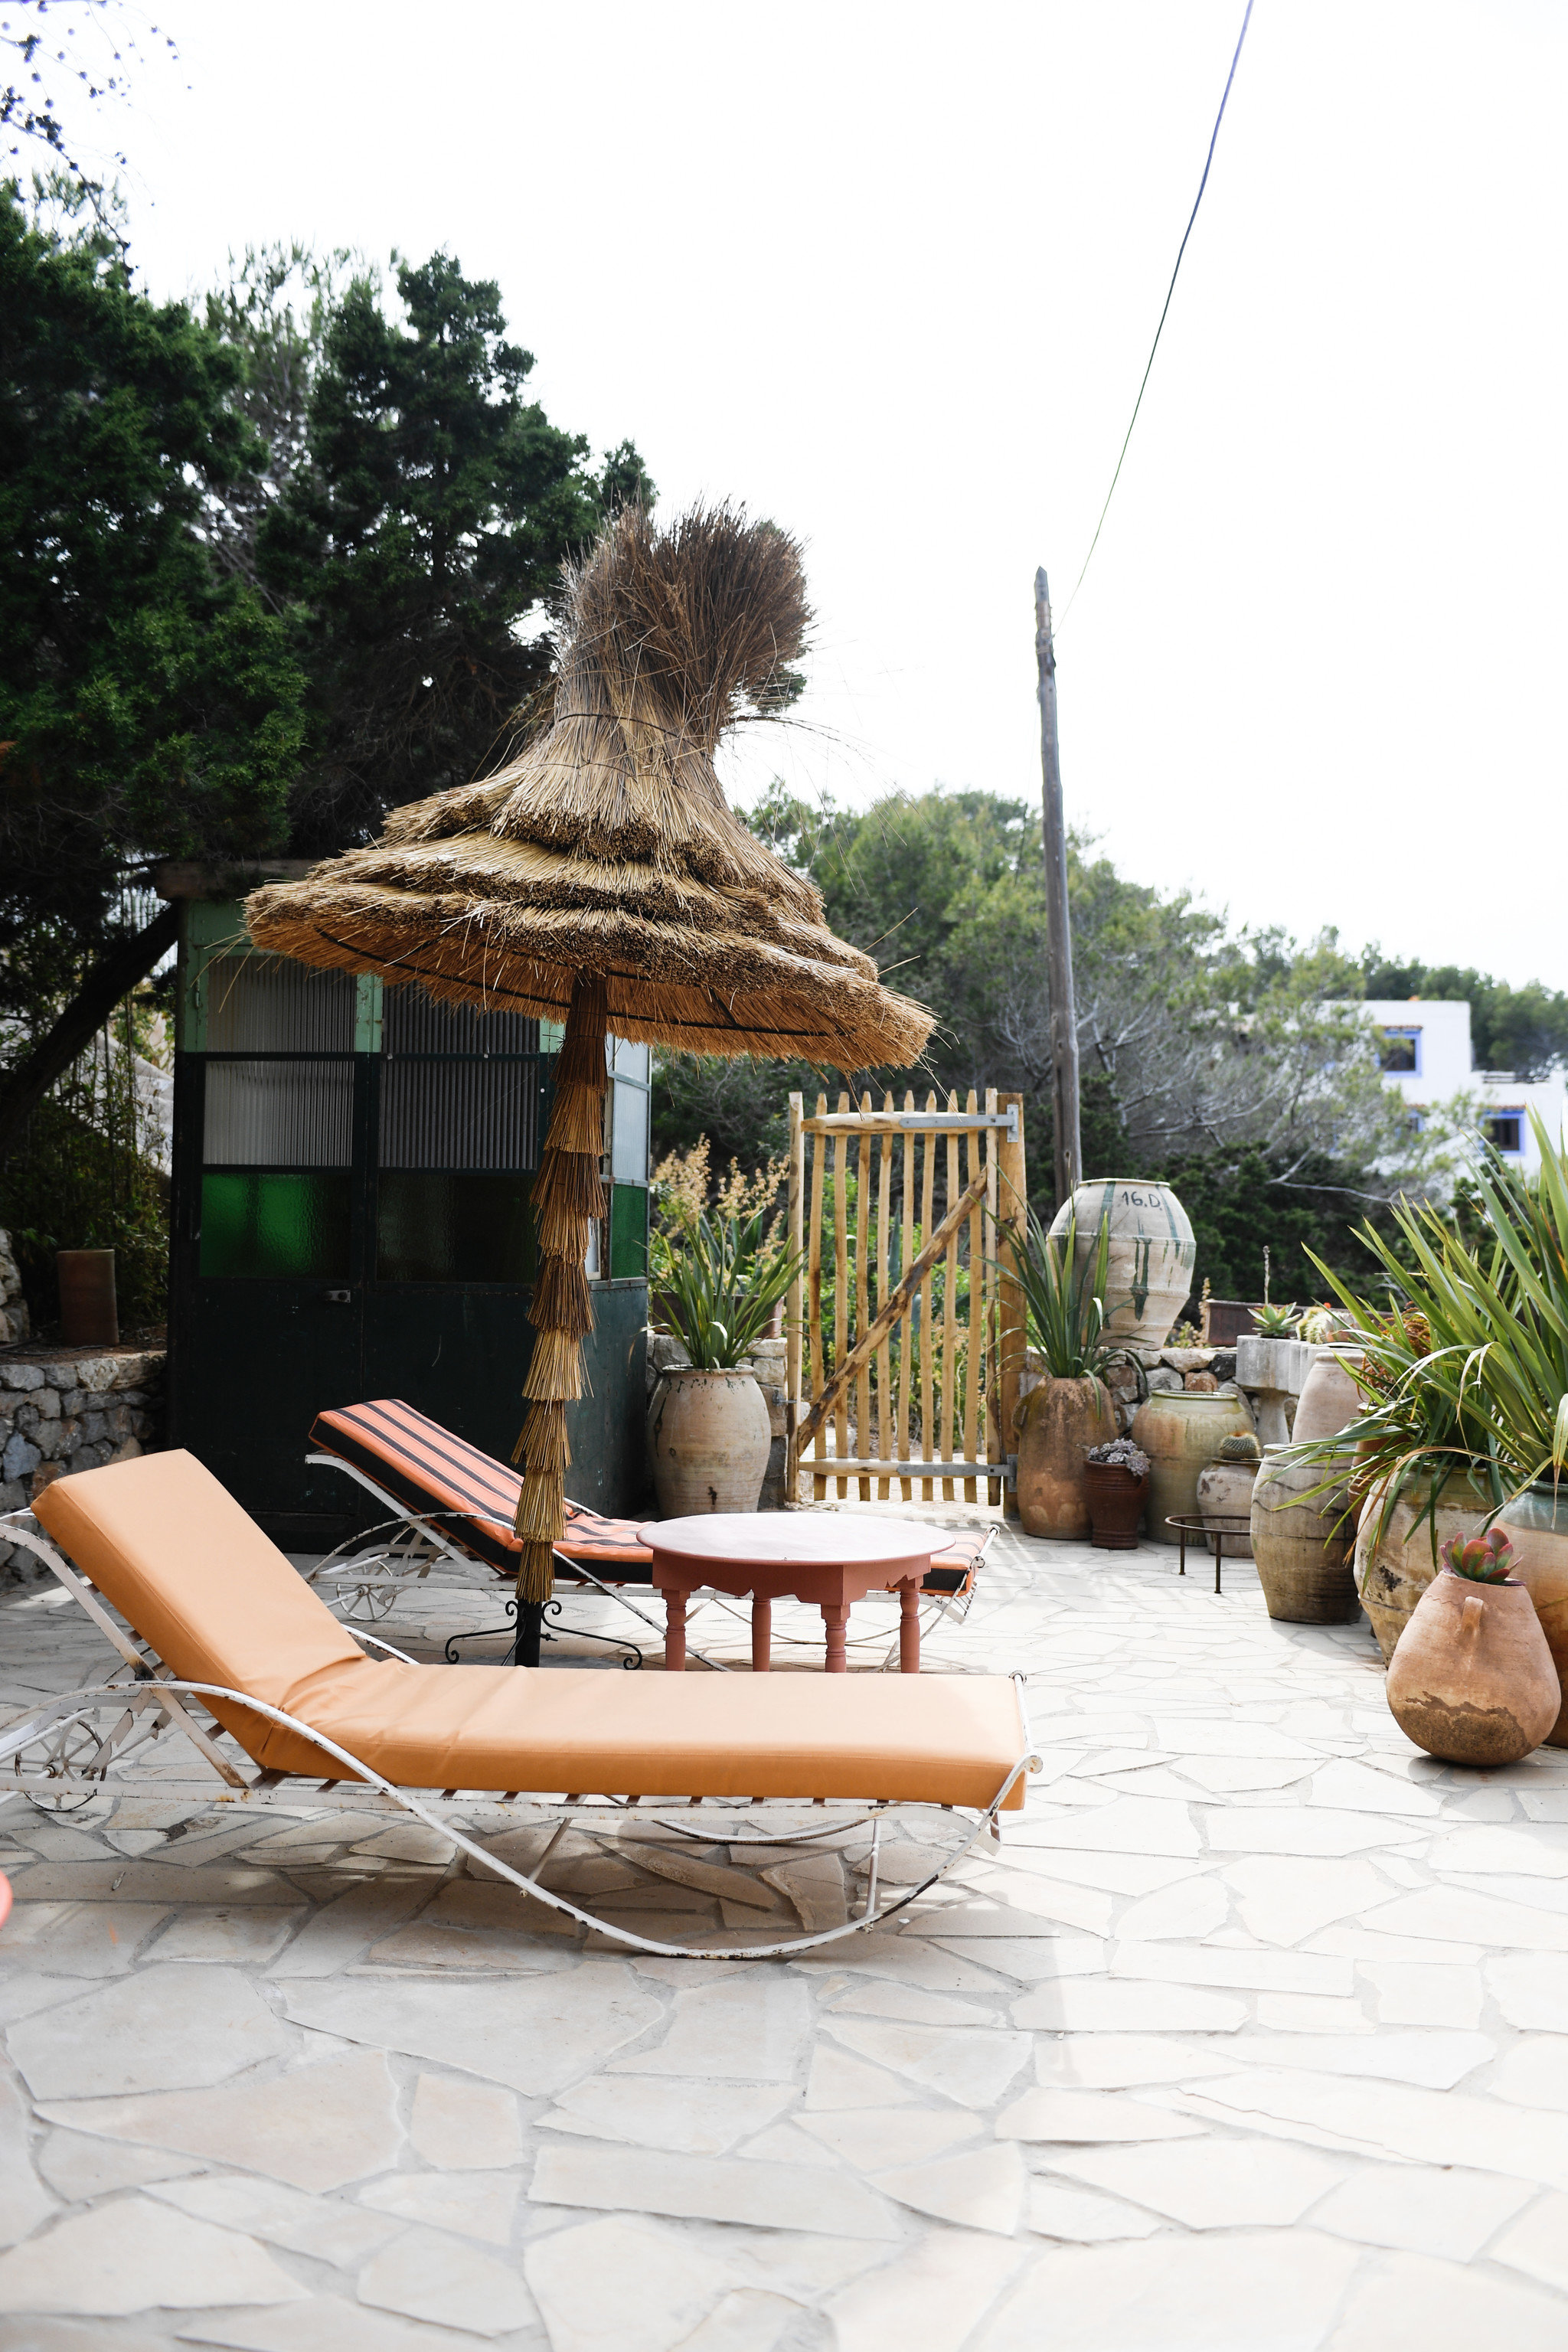 Boutique Hotels Hotels tree outdoor outdoor structure plant gazebo table outdoor furniture furniture stone